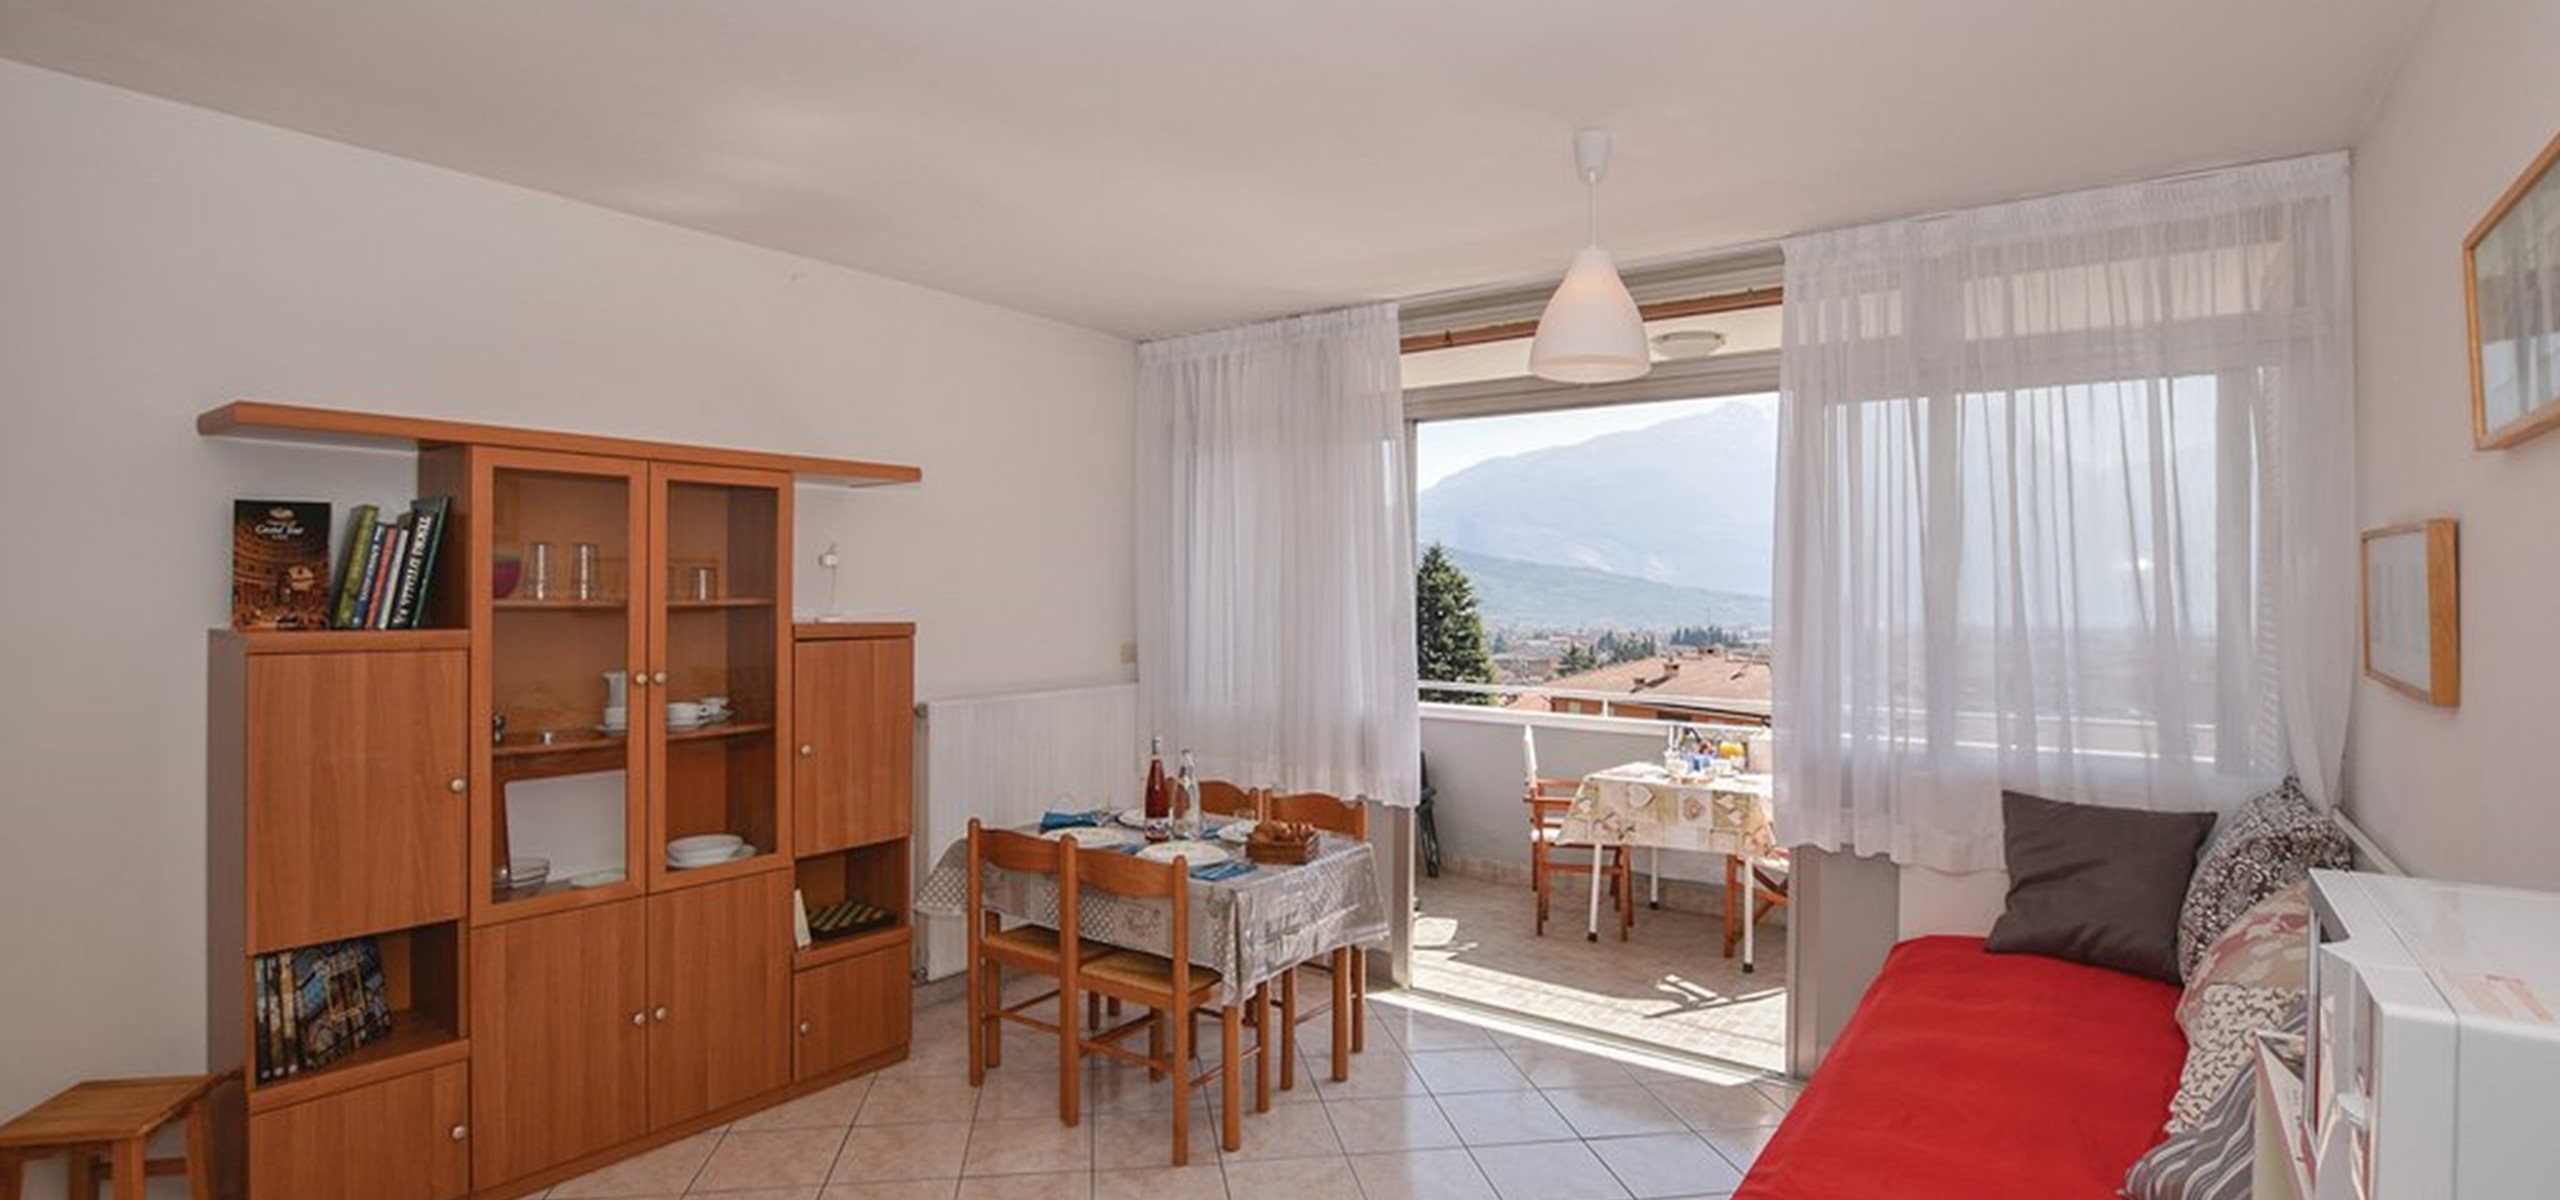 Simple Apartments For Rent In Garda Lake for Large Space